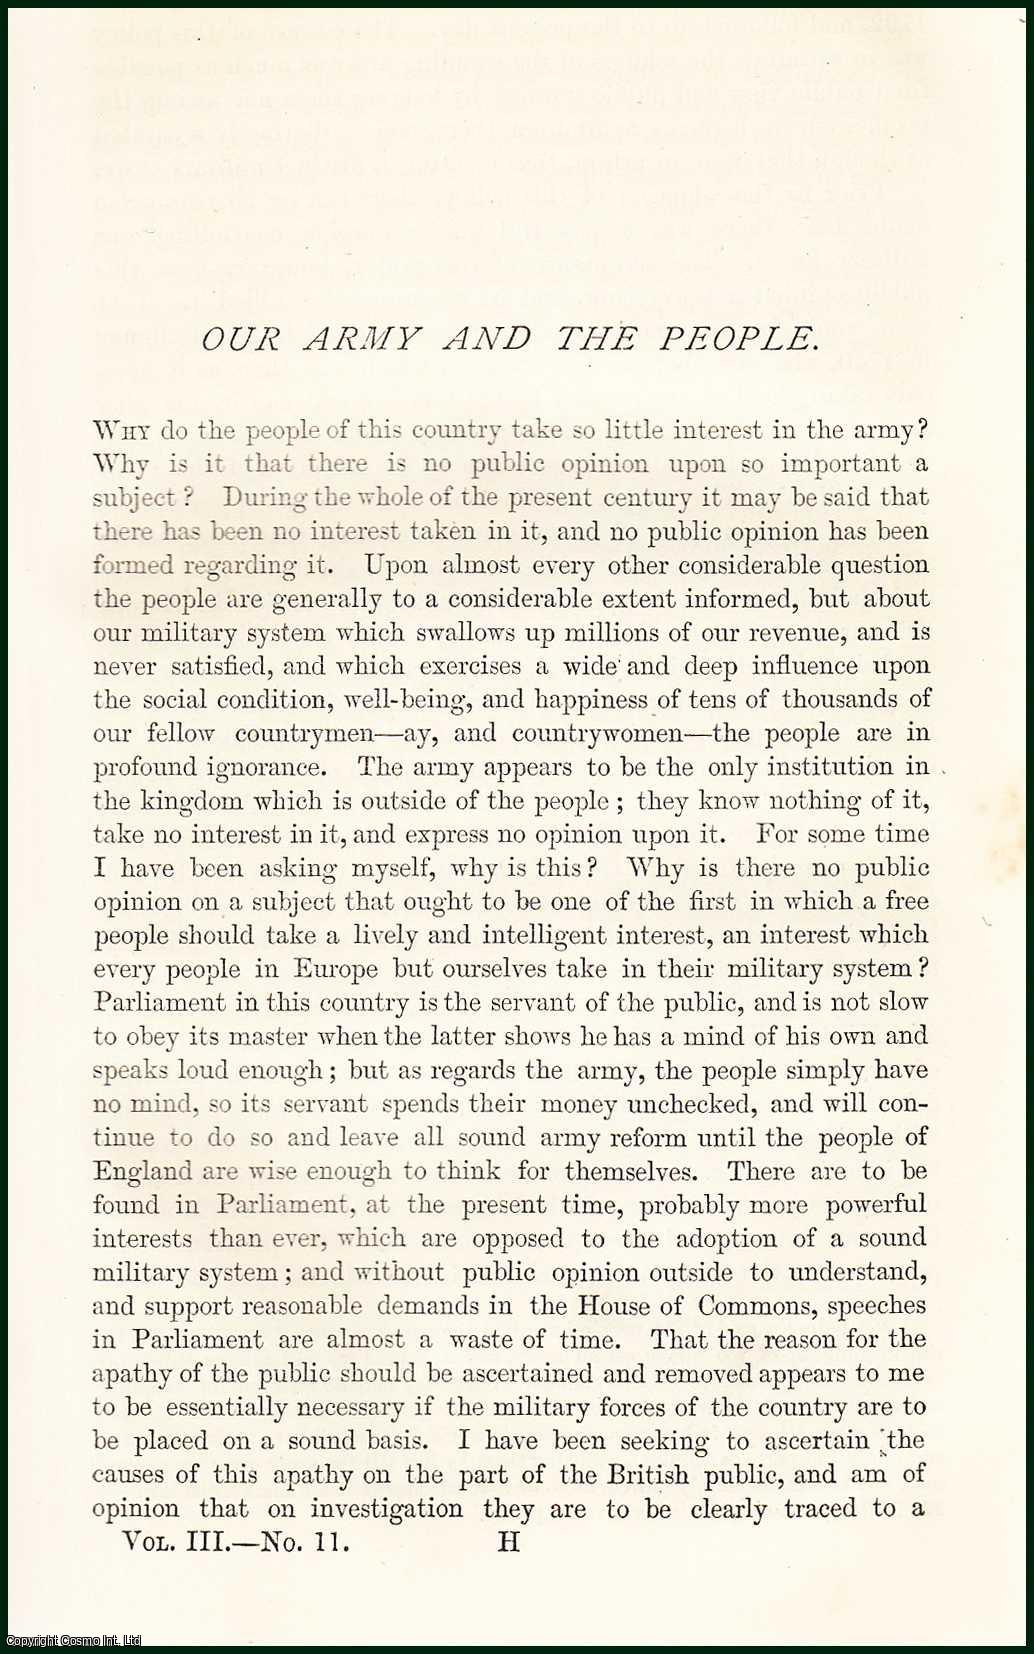 John Holms - Our Army and The People (Part I). An uncommon original article from the Nineteenth Century Magazine, 1878.